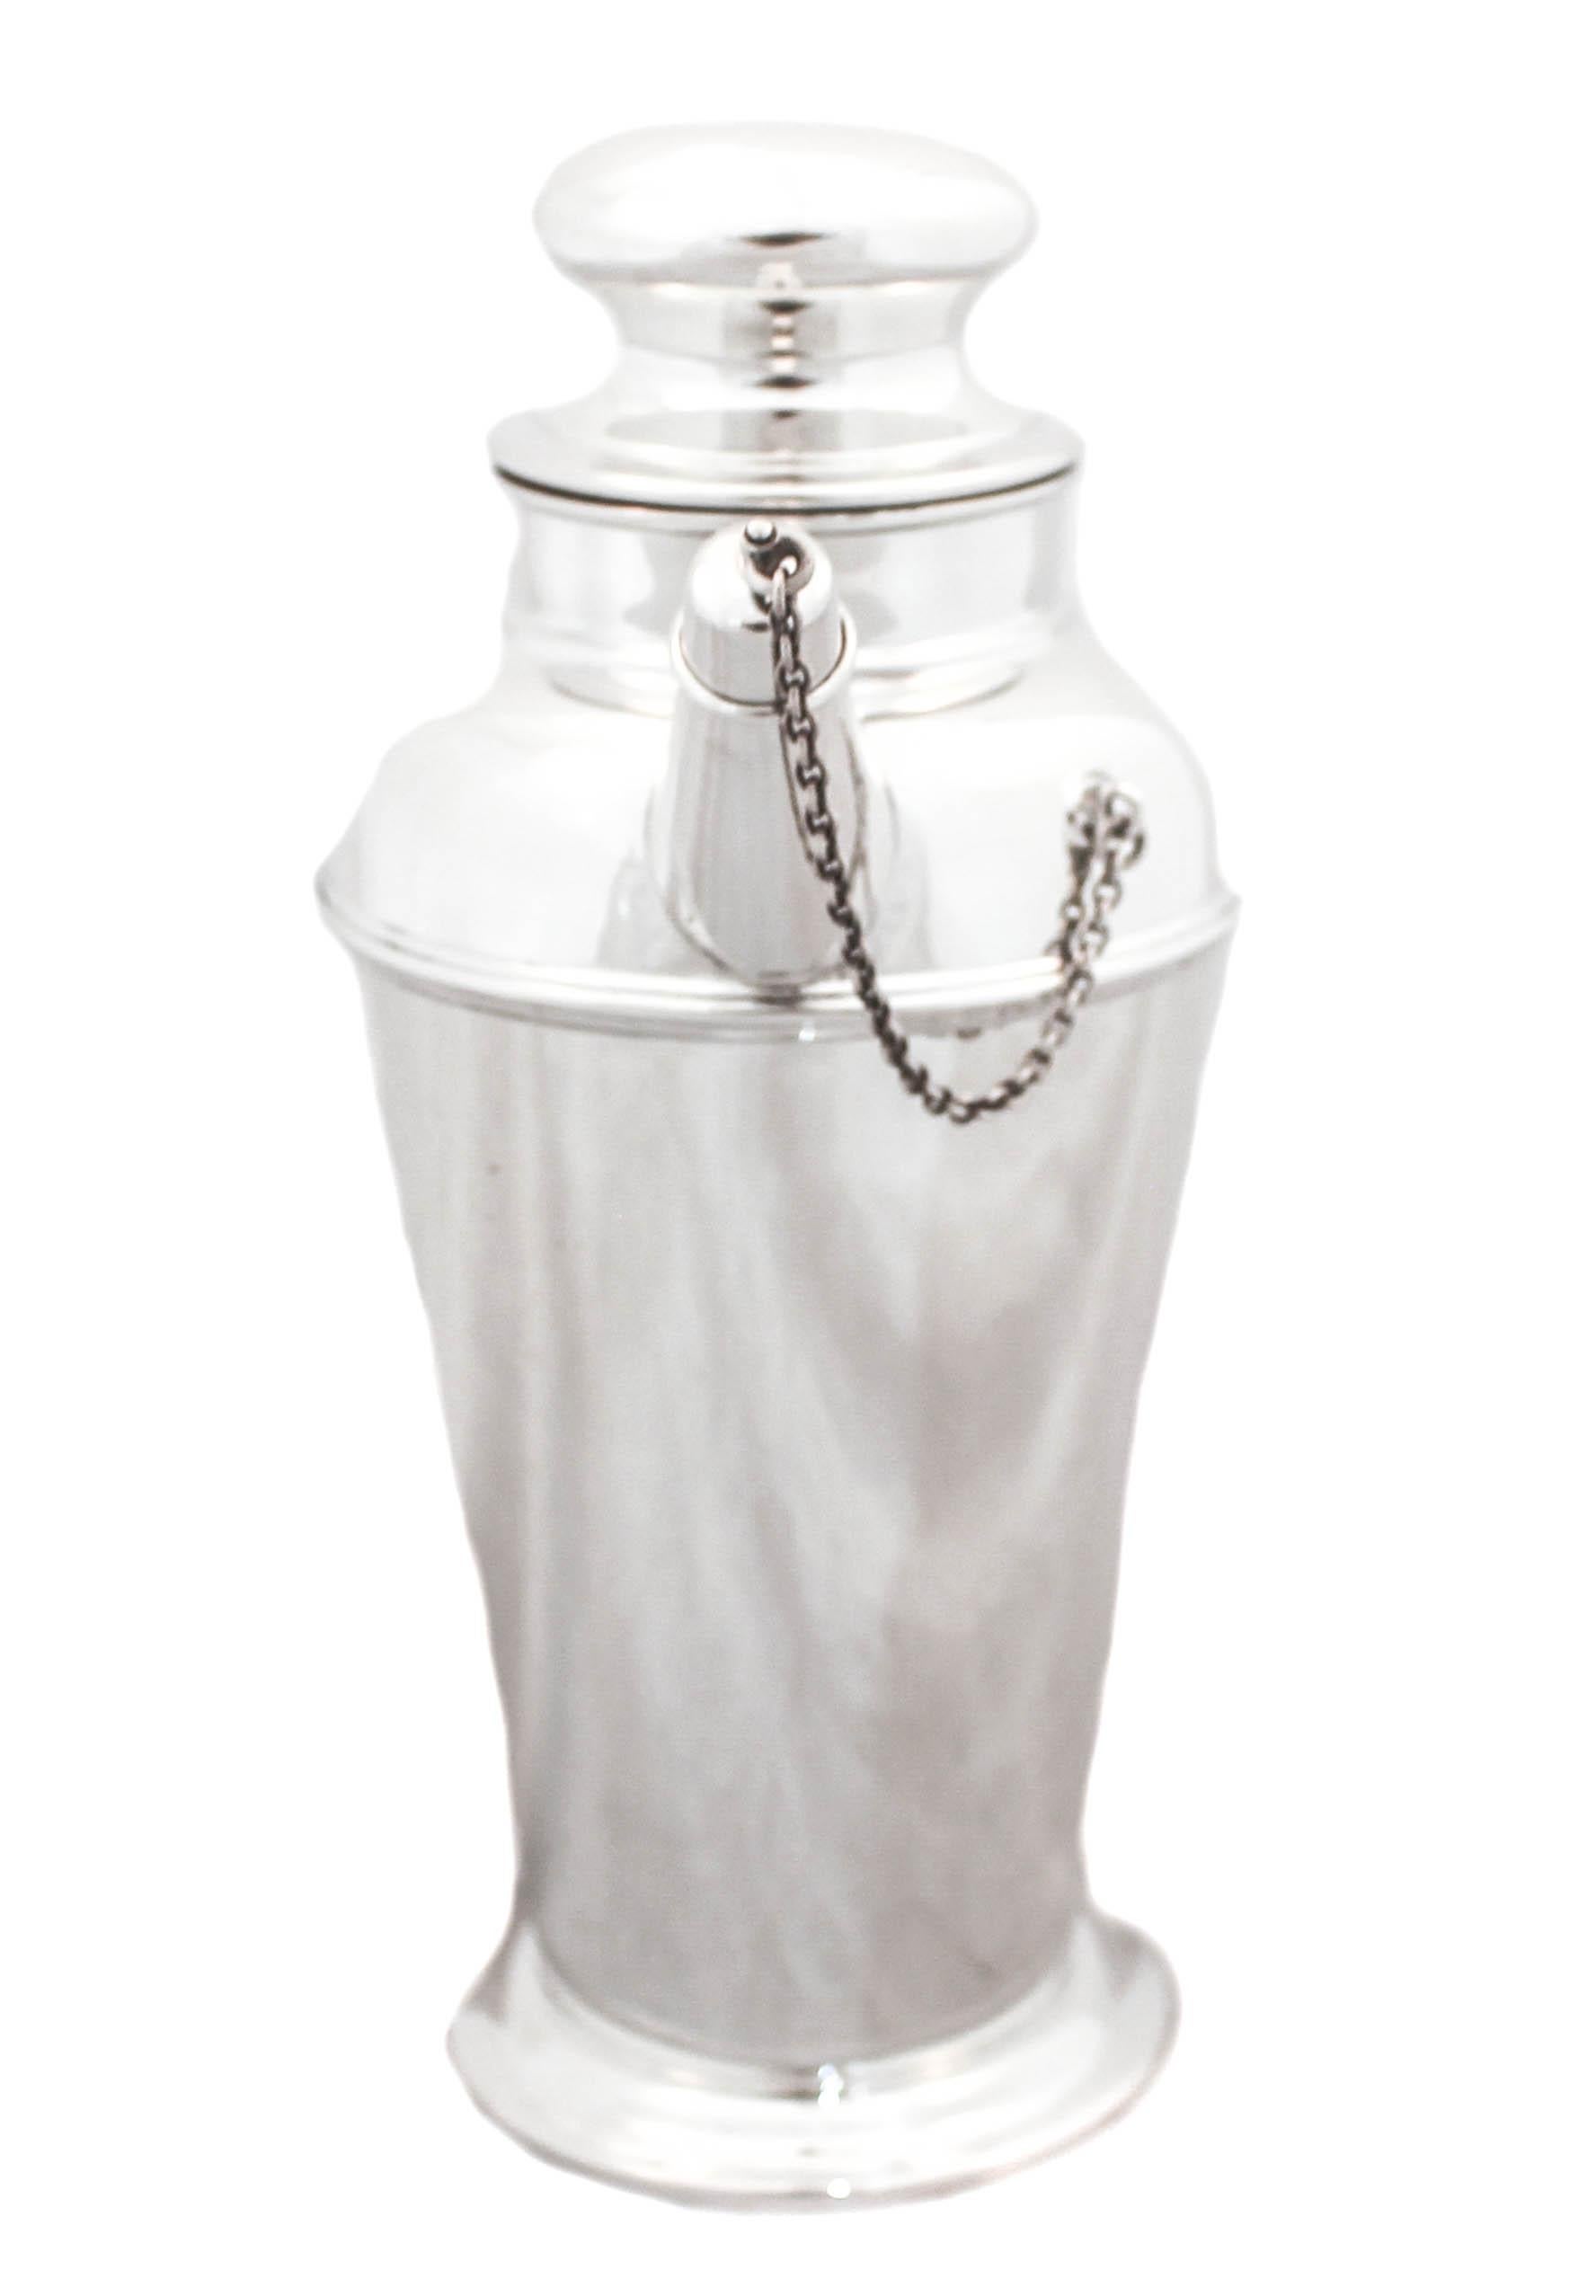 This sterling silver cocktail shaker is from the 1950’s.  Think “Breakfast at Tiffany’s” and The Rat Pack; the glamour and sleekness of that era come to life in this beautiful silver shaker. It’s in mint condition and waiting to greet your guests. 